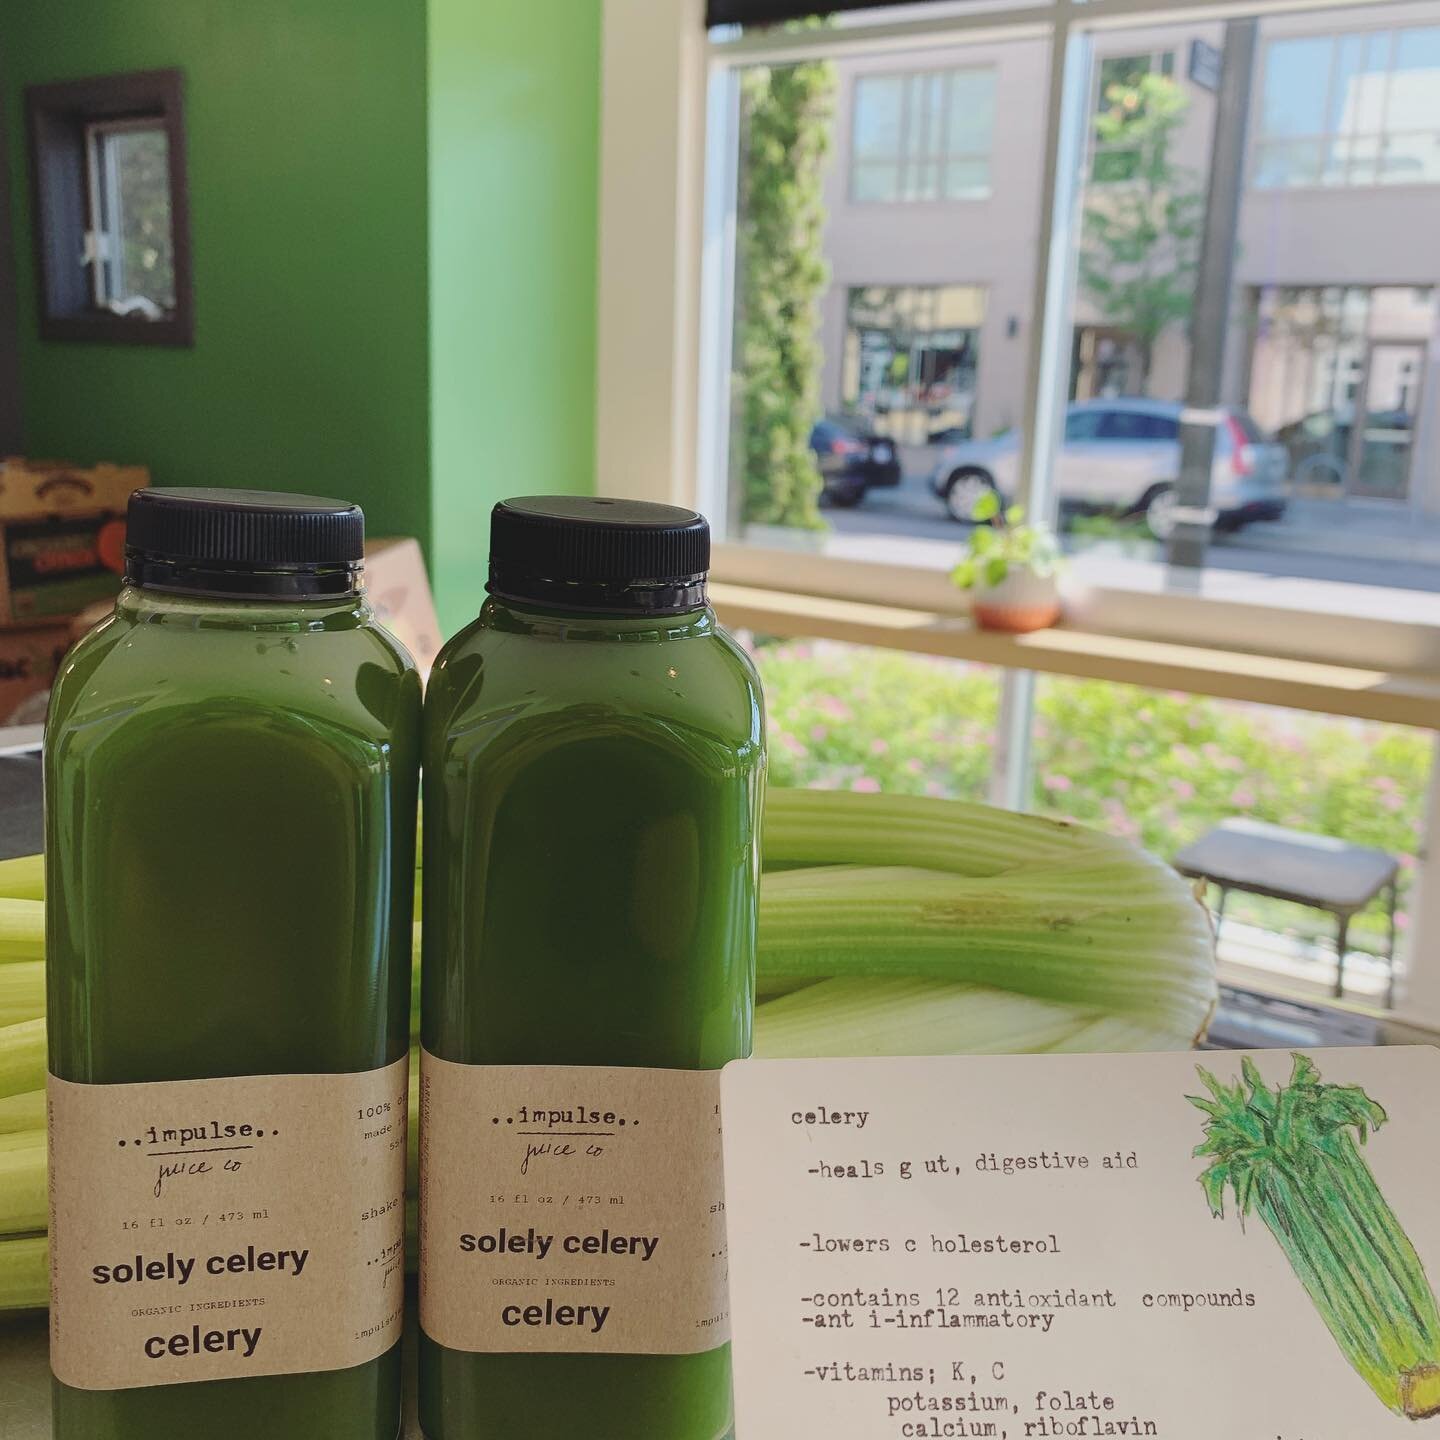 fresh celery juice is in stalk ... get it? 🥁 

hey, we&rsquo;ll be here all week (literally)

apparently there is a celery museum in Michigan, please comment if you&rsquo;ve been or have been longing to go!

#celeryfacts #michiganthehomeofcelery #mo